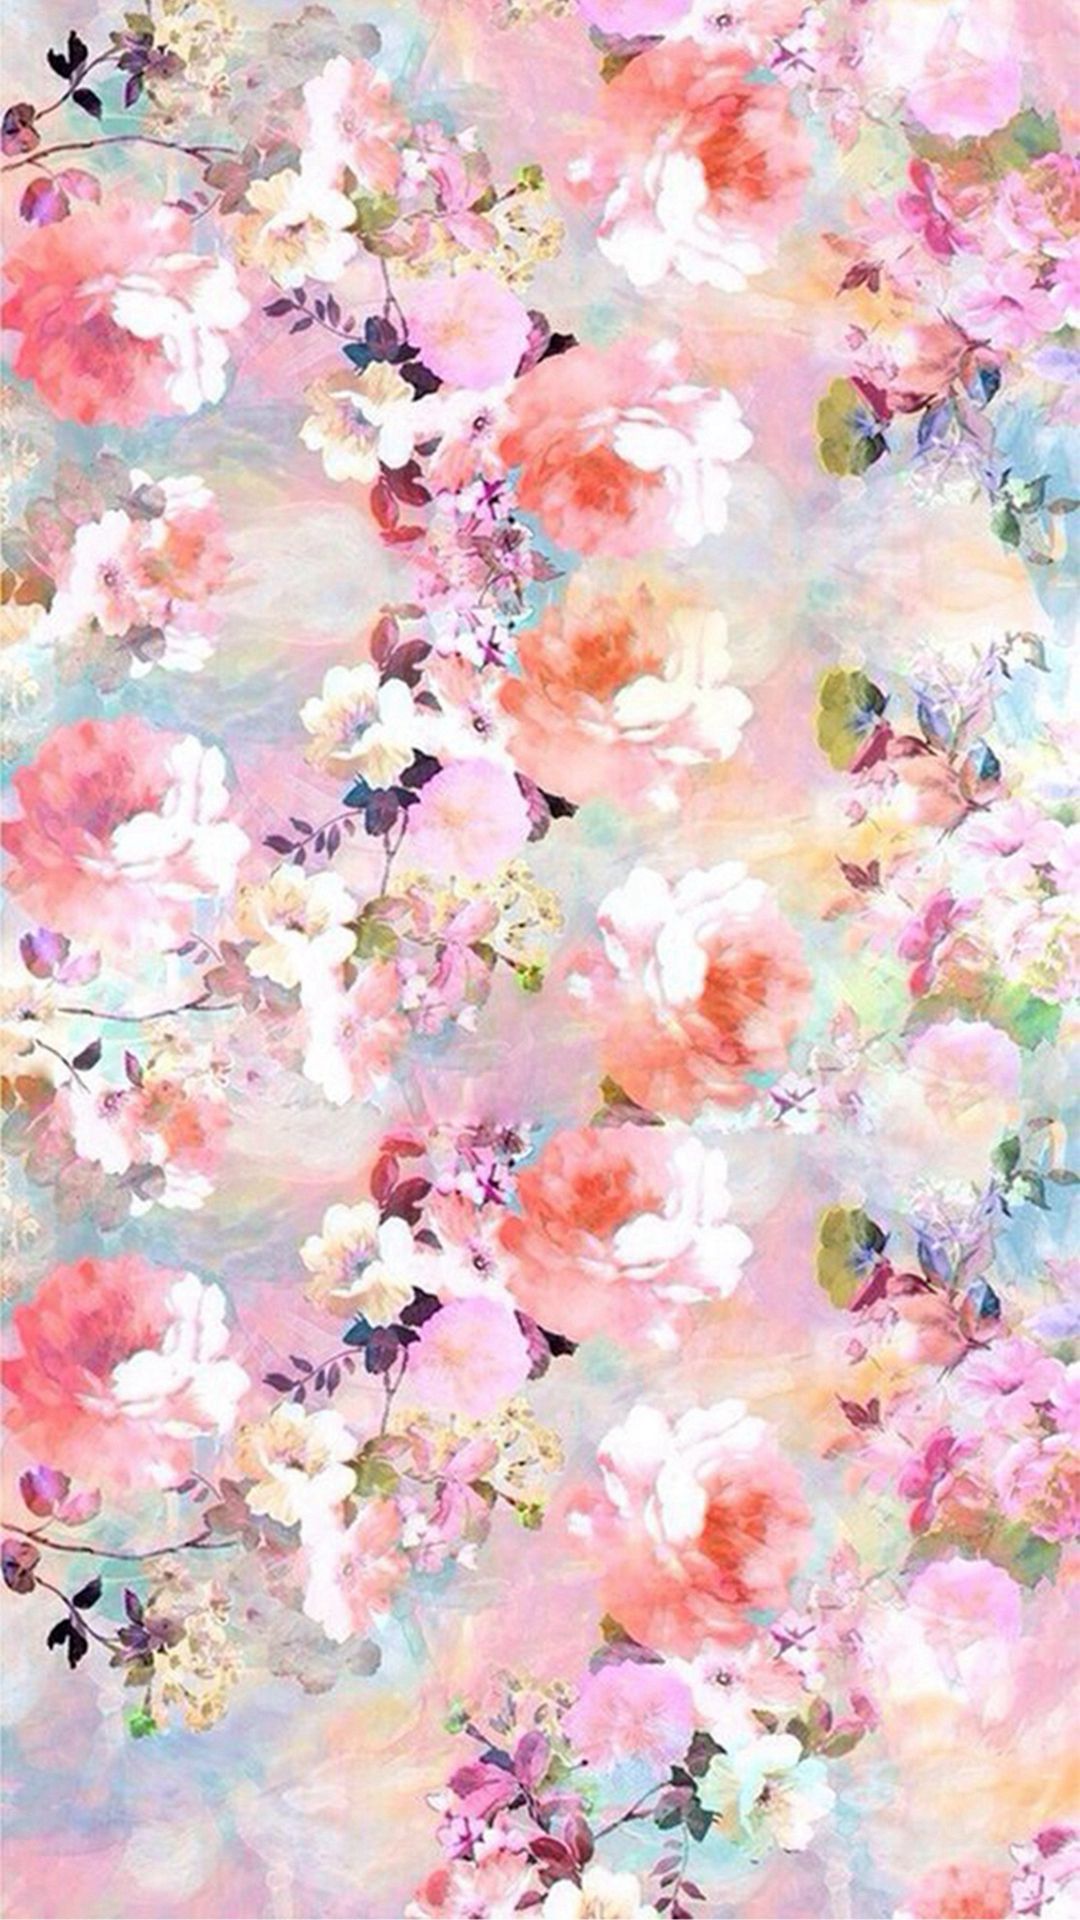 Watercolor Flowers Painting iPhone 8 Wallpaper Free Download